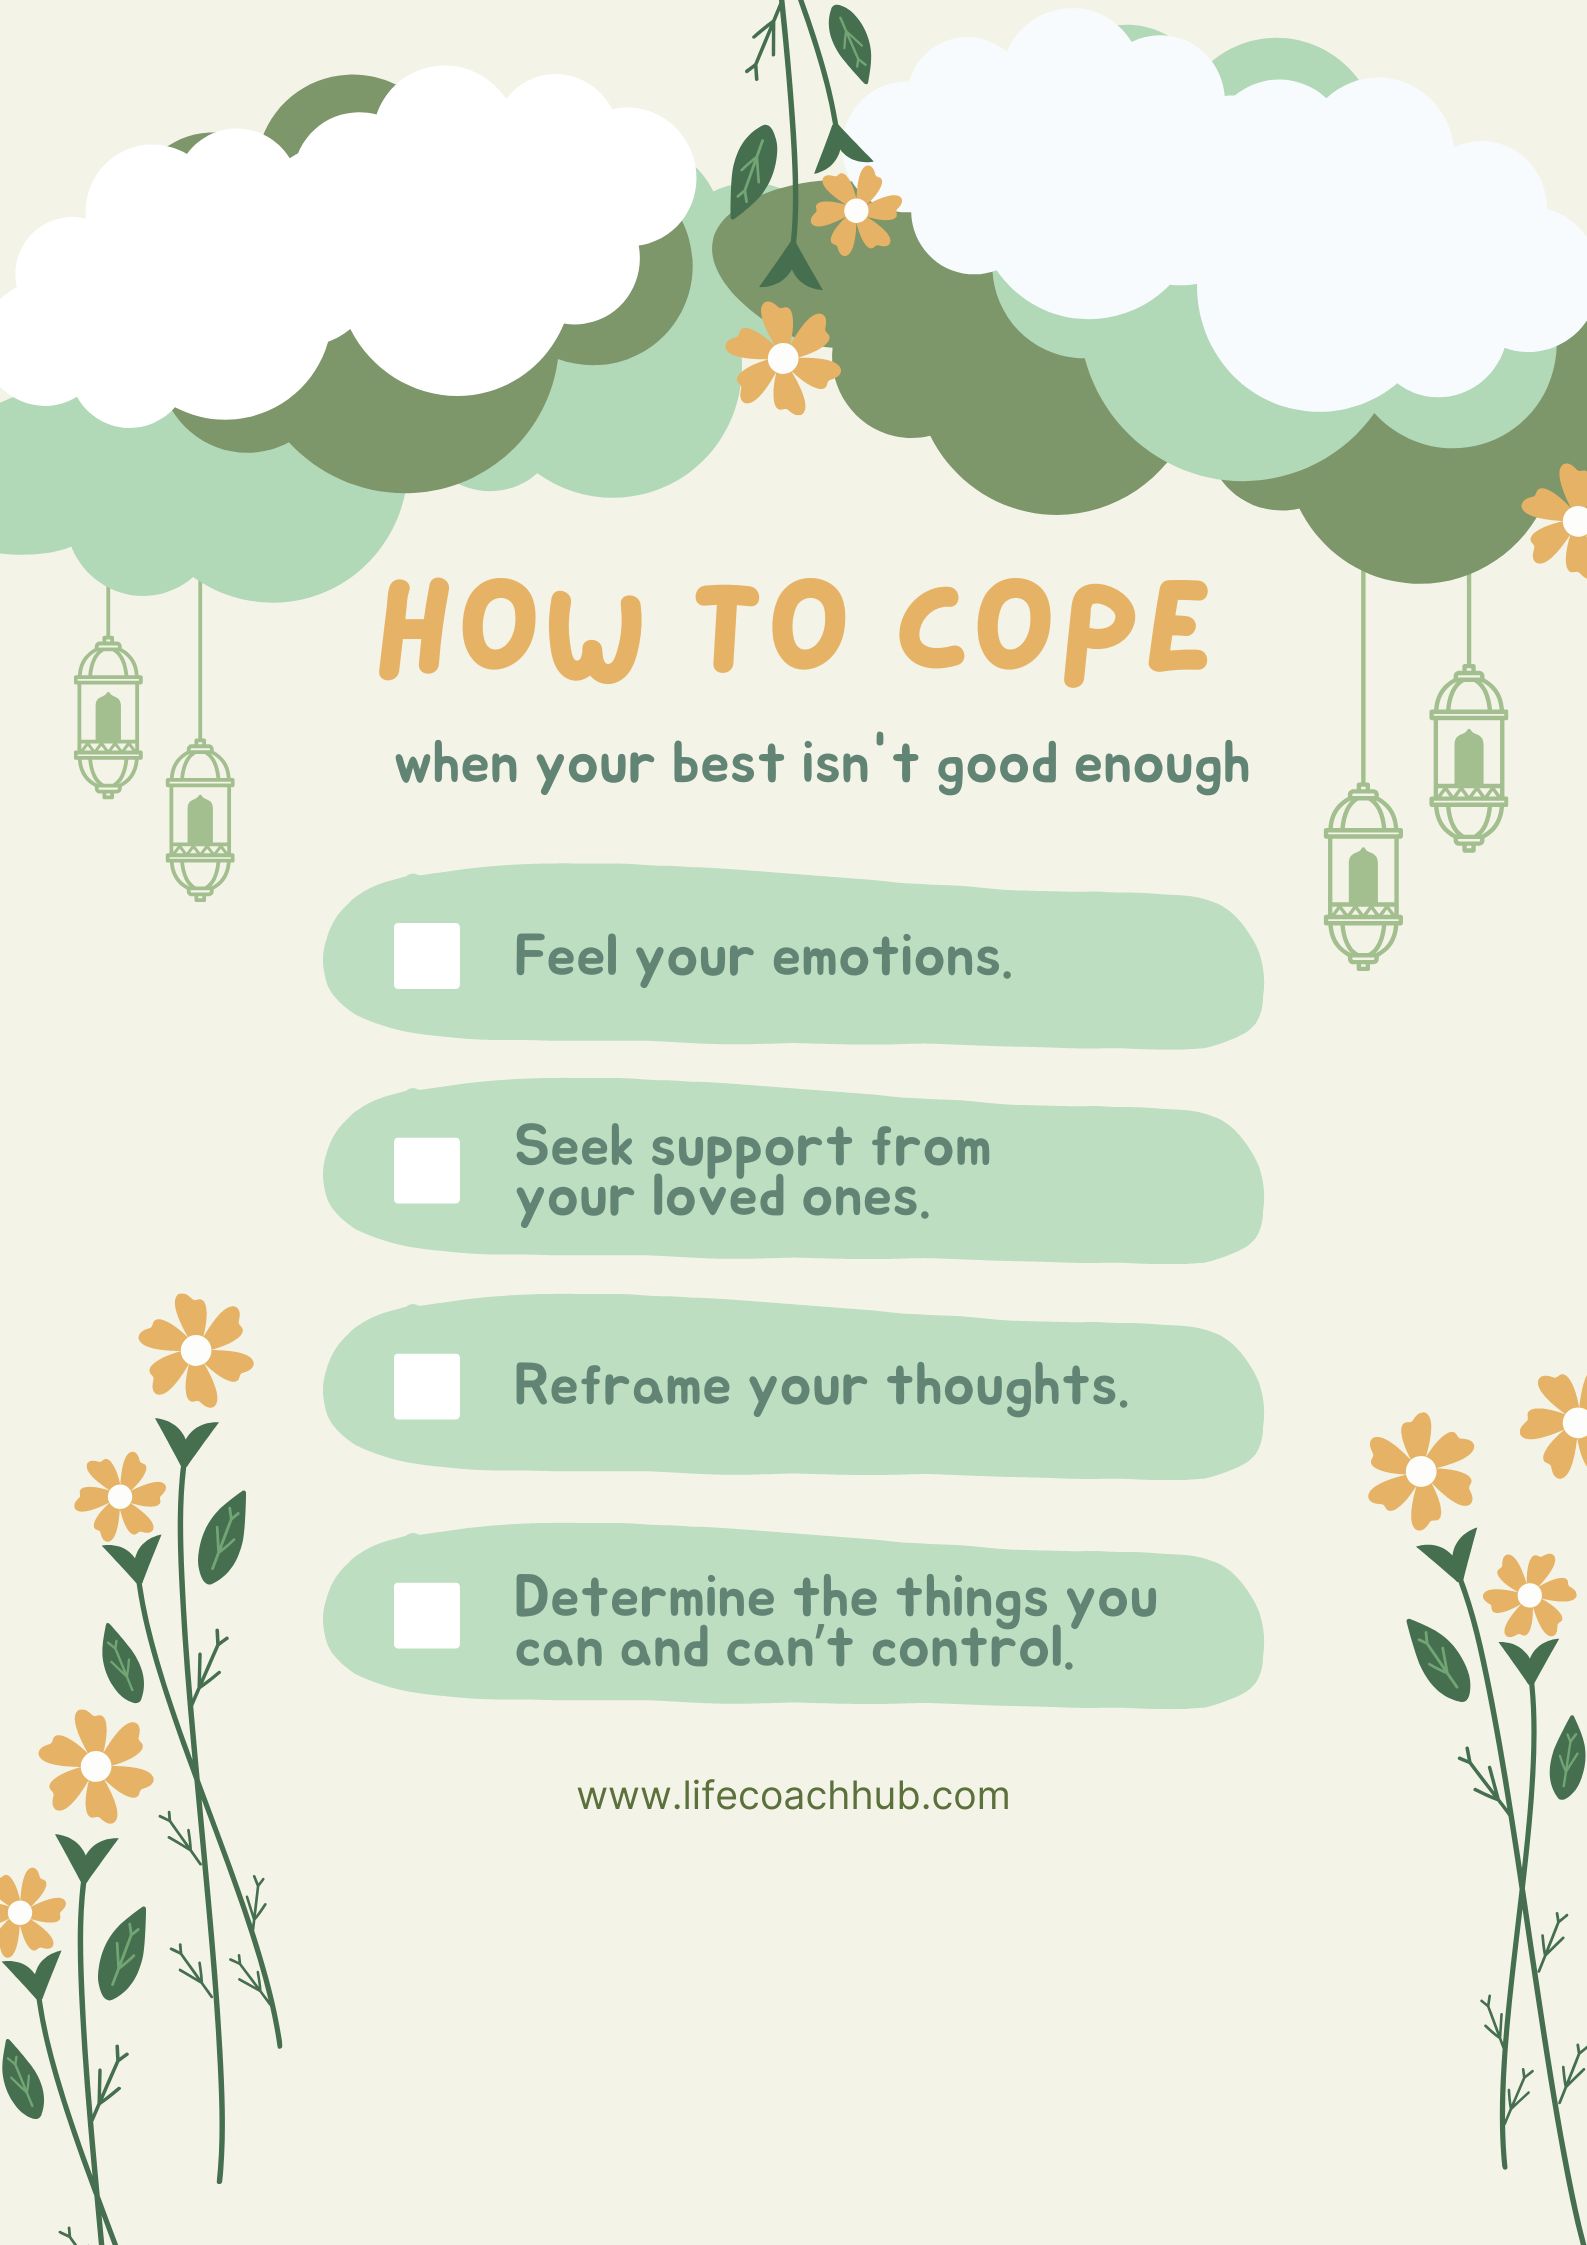 How to cope when your best isn't good enough, feel your emotions, seek support from your loved ones, reframe your thoughts, determine the things you can and can't control, coaching tip